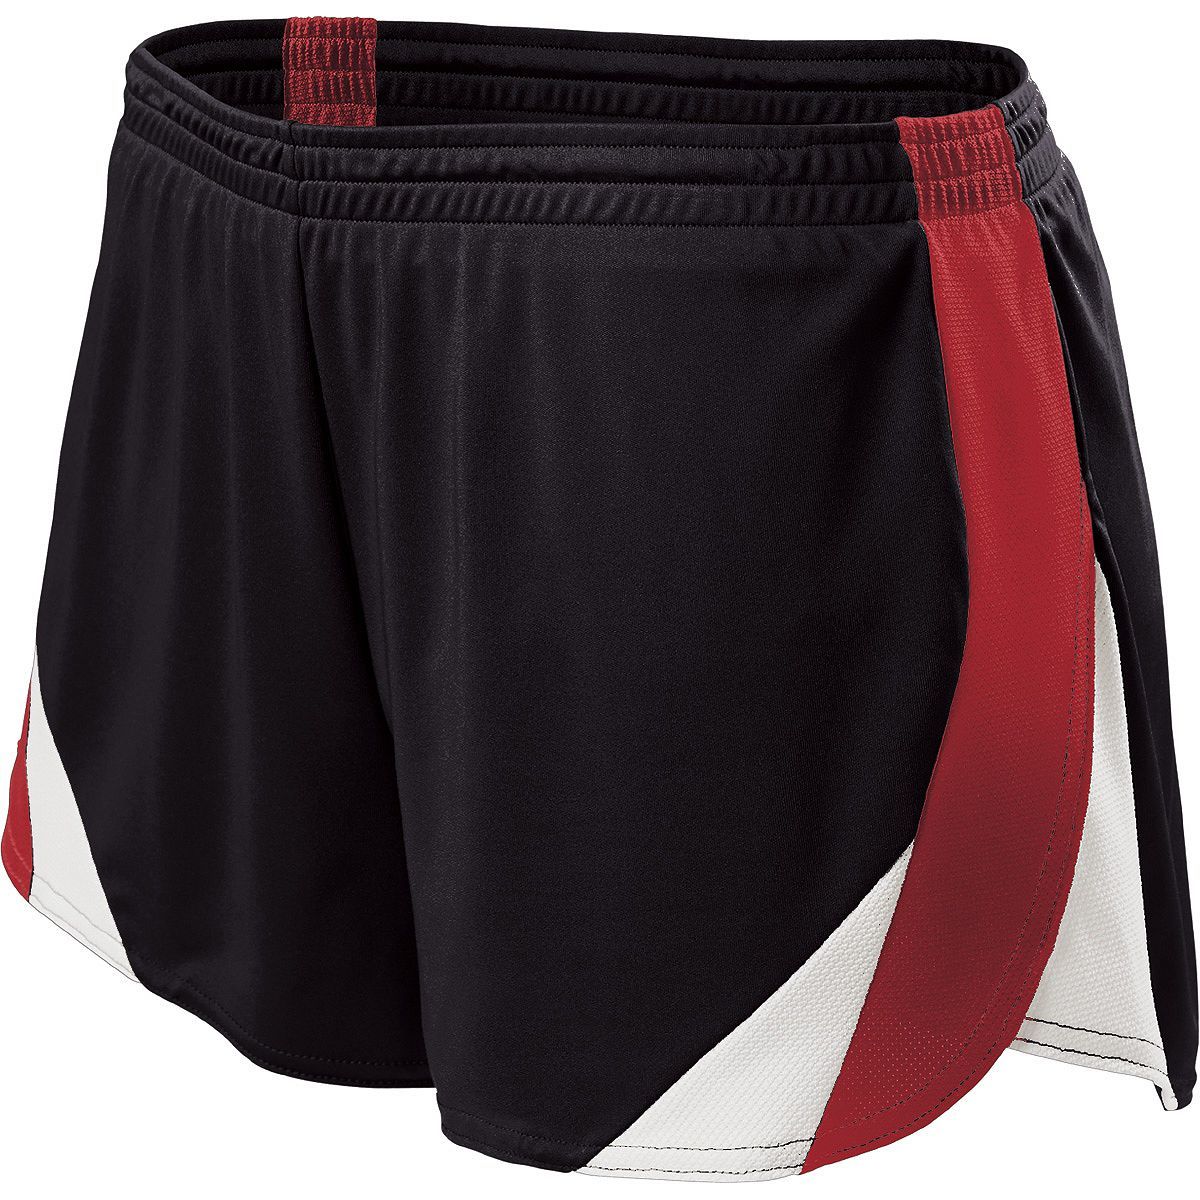 Holloway Ladies Approach Shorts in Black/Scarlet/White  -Part of the Ladies, Ladies-Shorts, Track-Field, Holloway product lines at KanaleyCreations.com